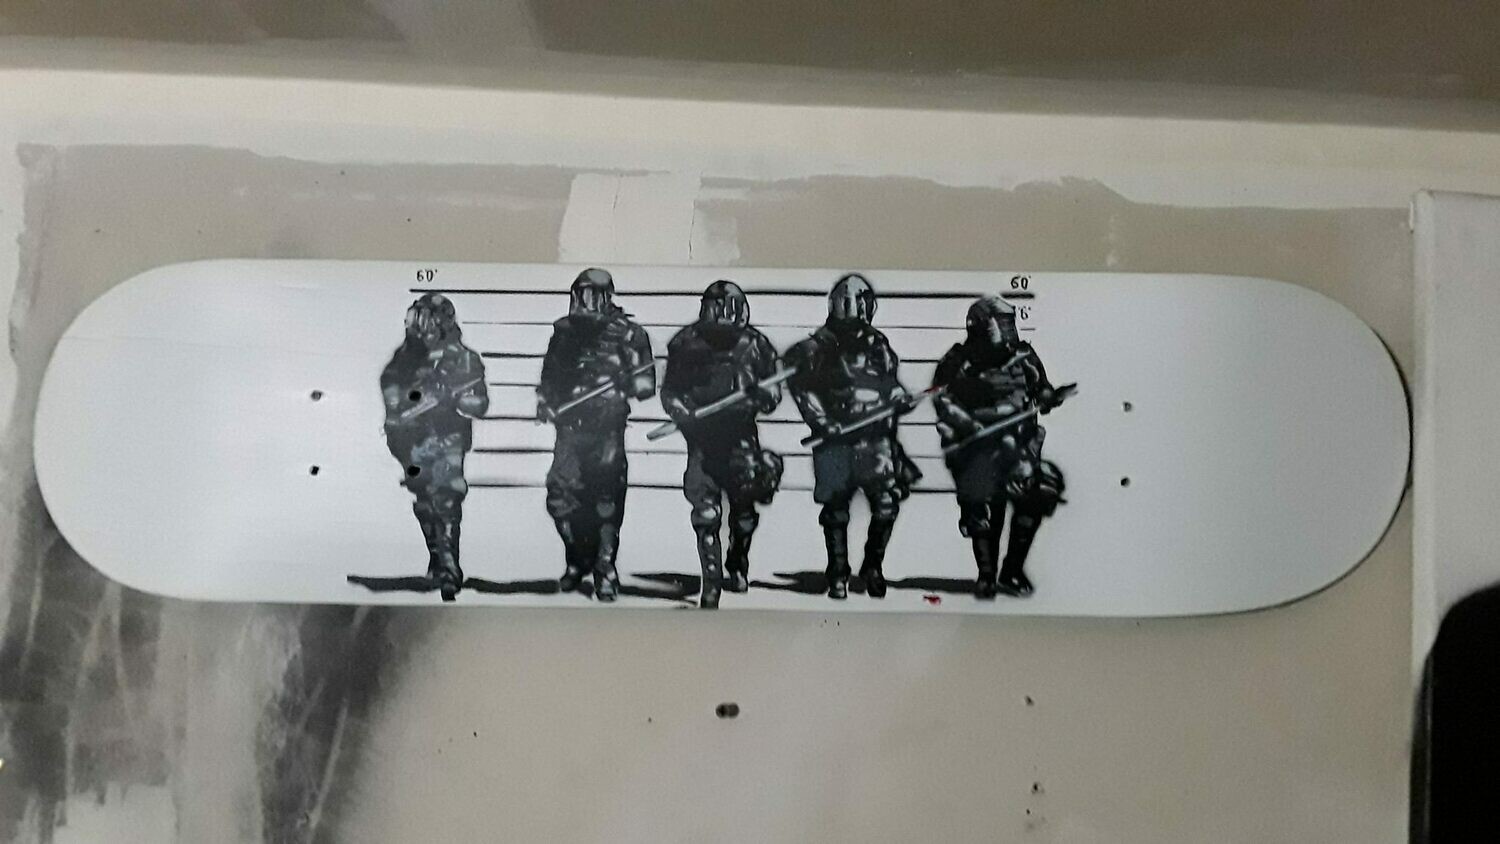 The Usual Suspects Skate Deck